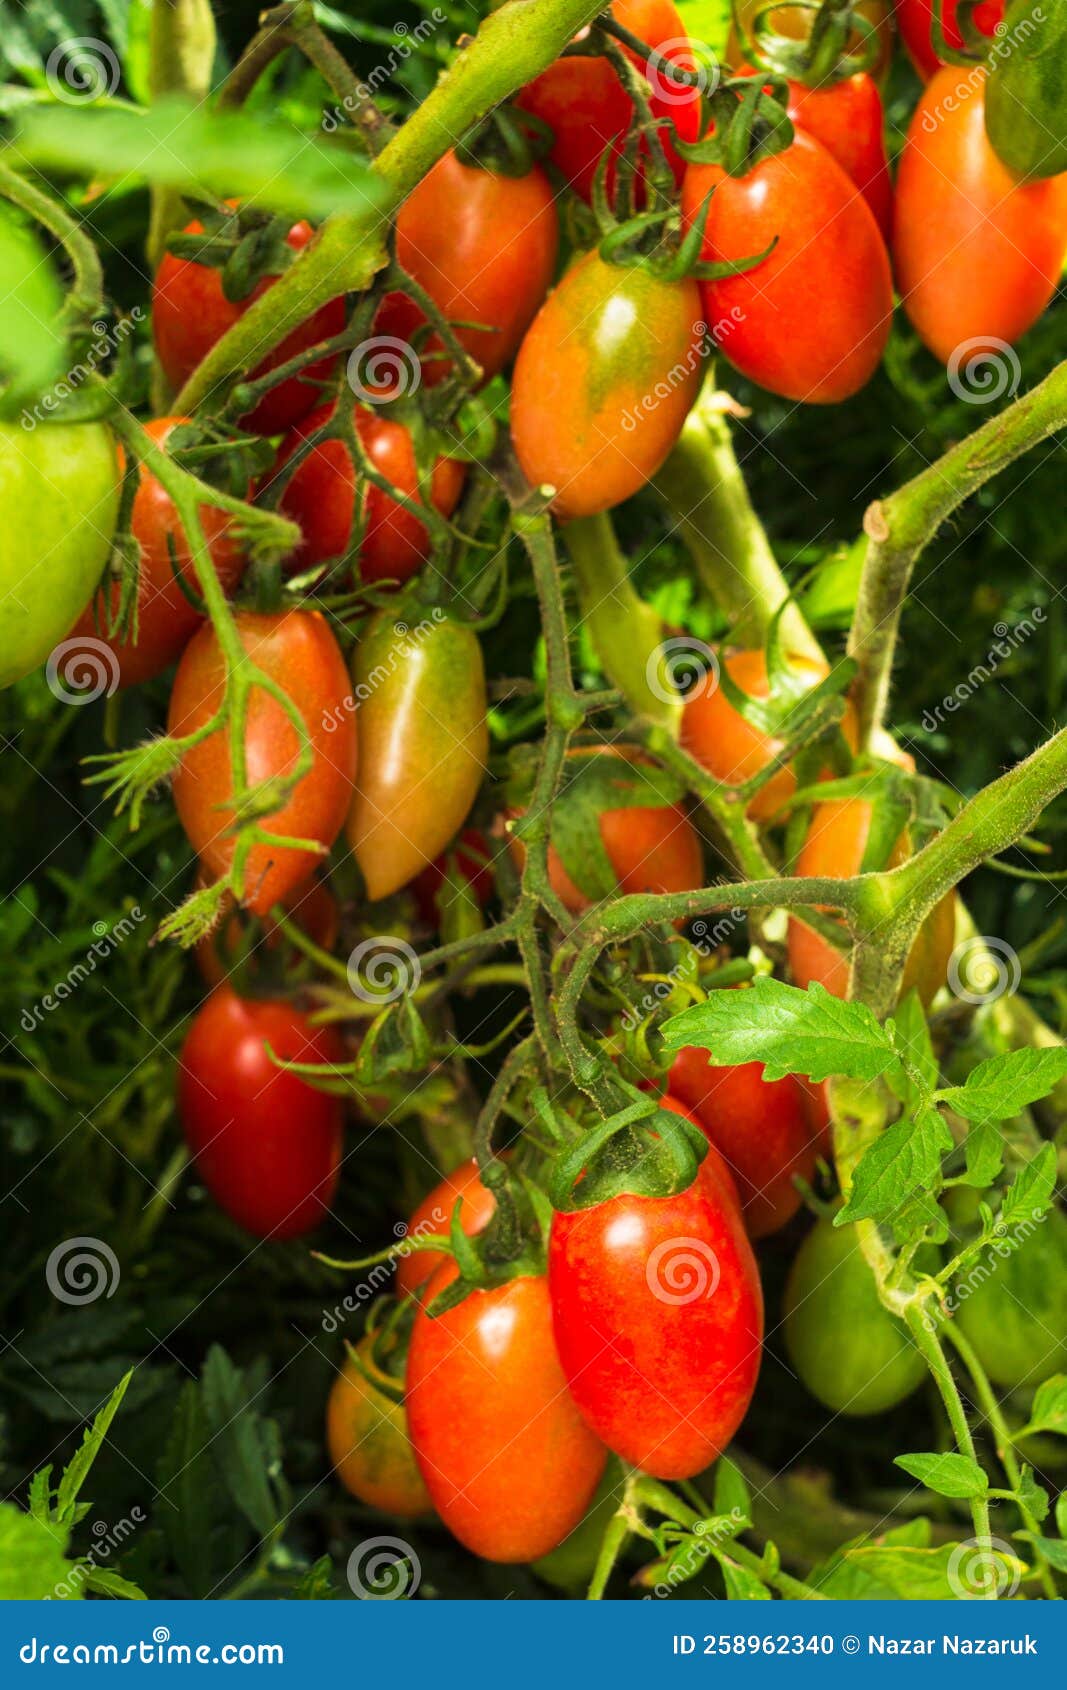 Home Grown Plum Tomatoes Also Known As A Processing Tomato Or Paste